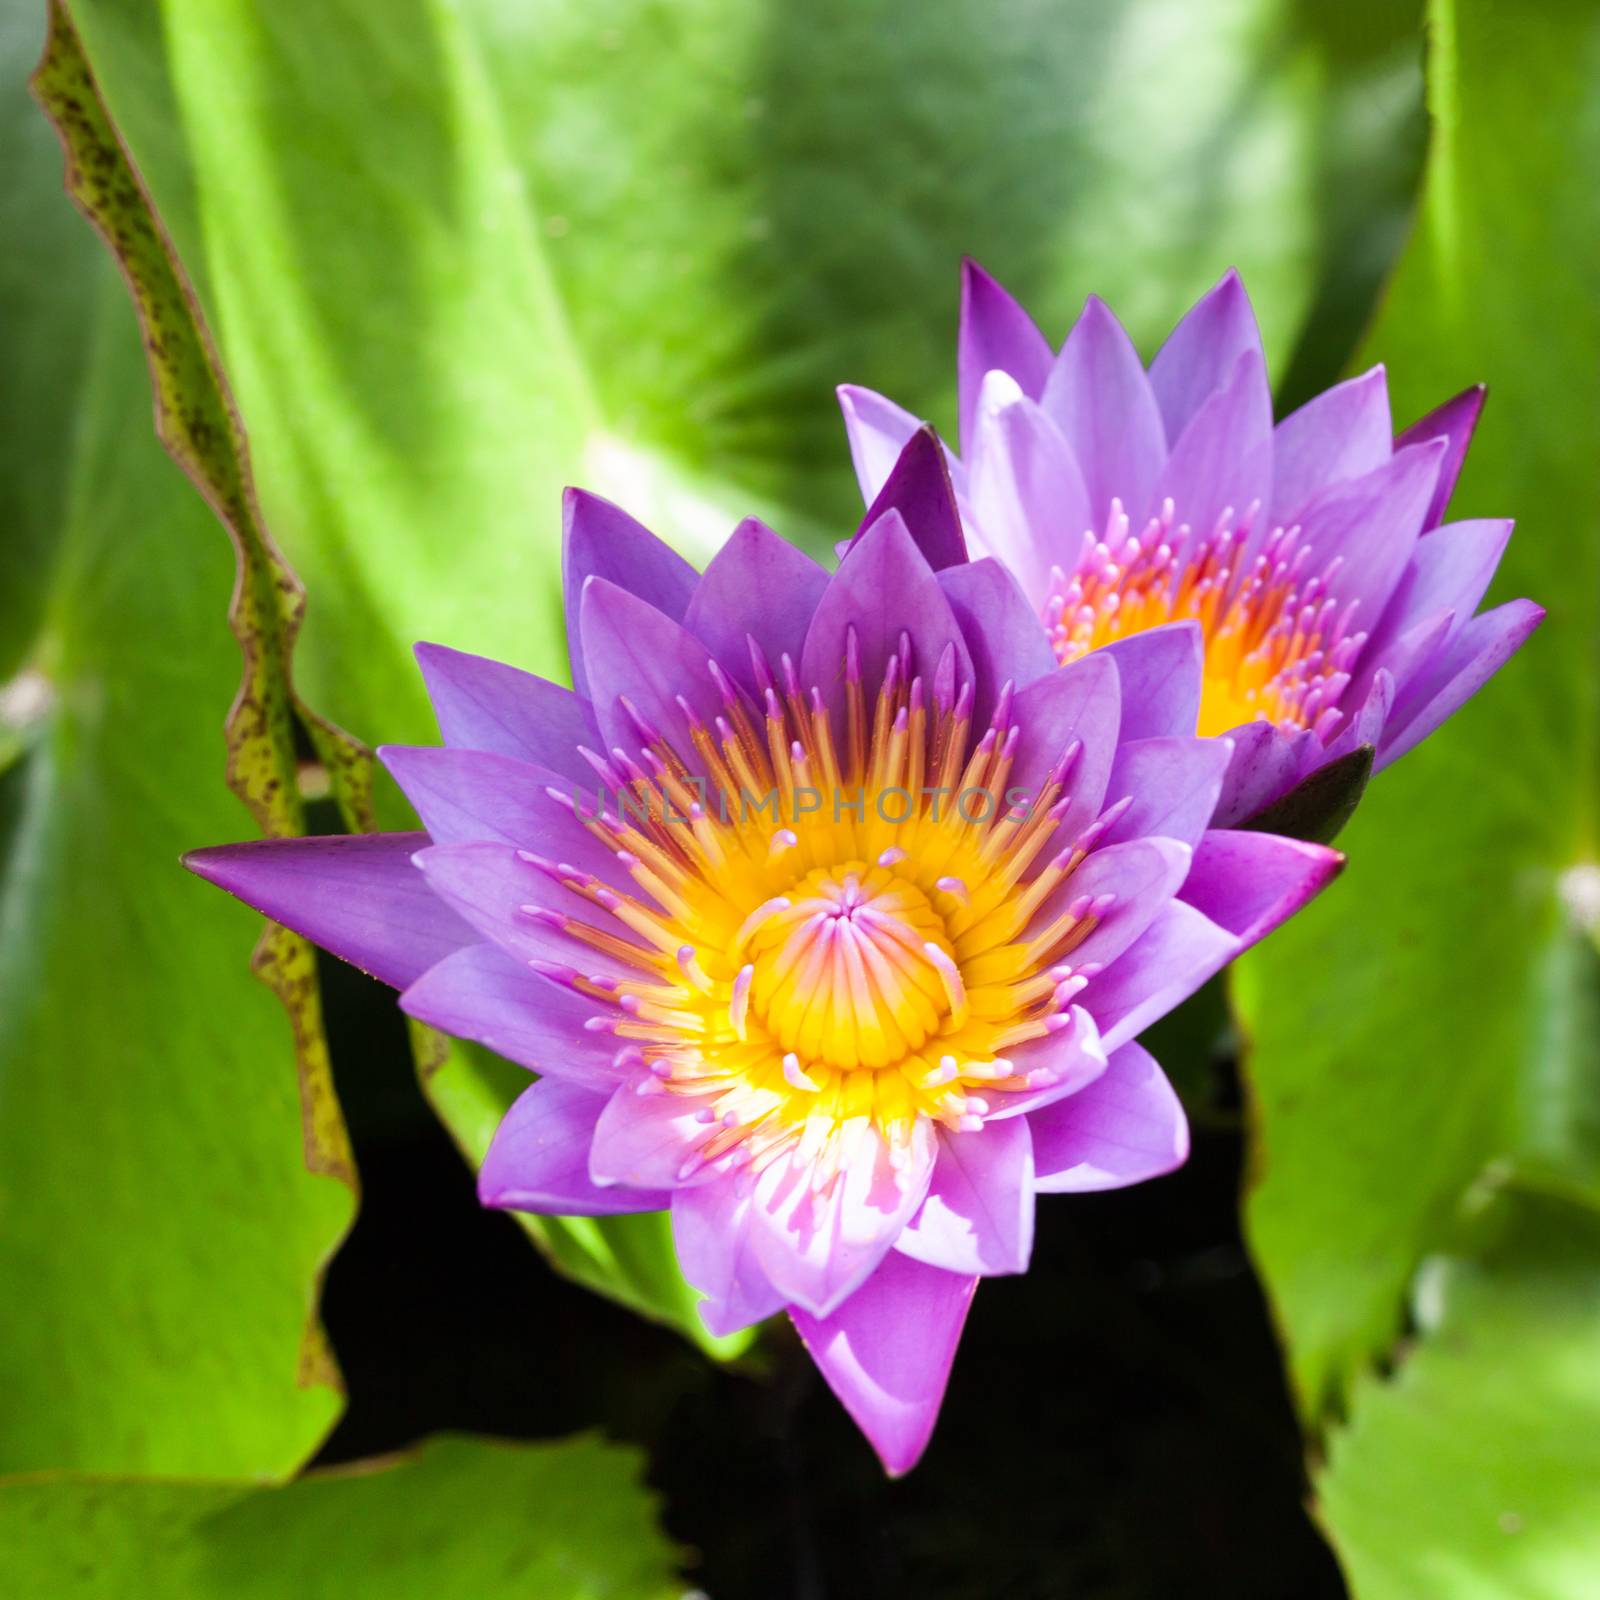 Beautiful lotus flower. Saturated colors and vibrant detail make by nopparats